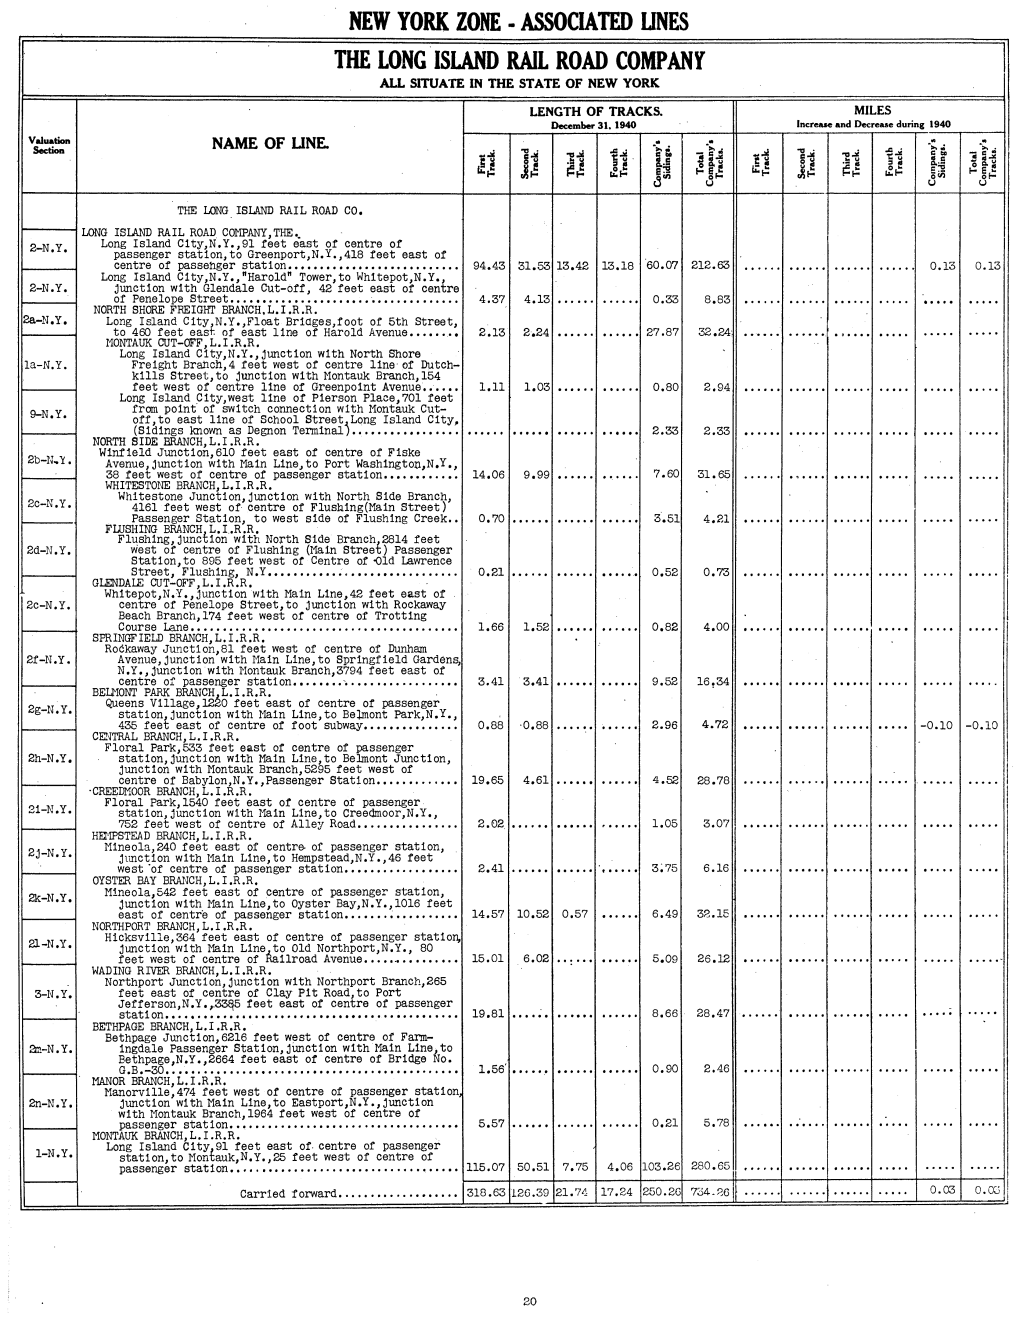 LIRR Pages PRR Record of Transportation Lines